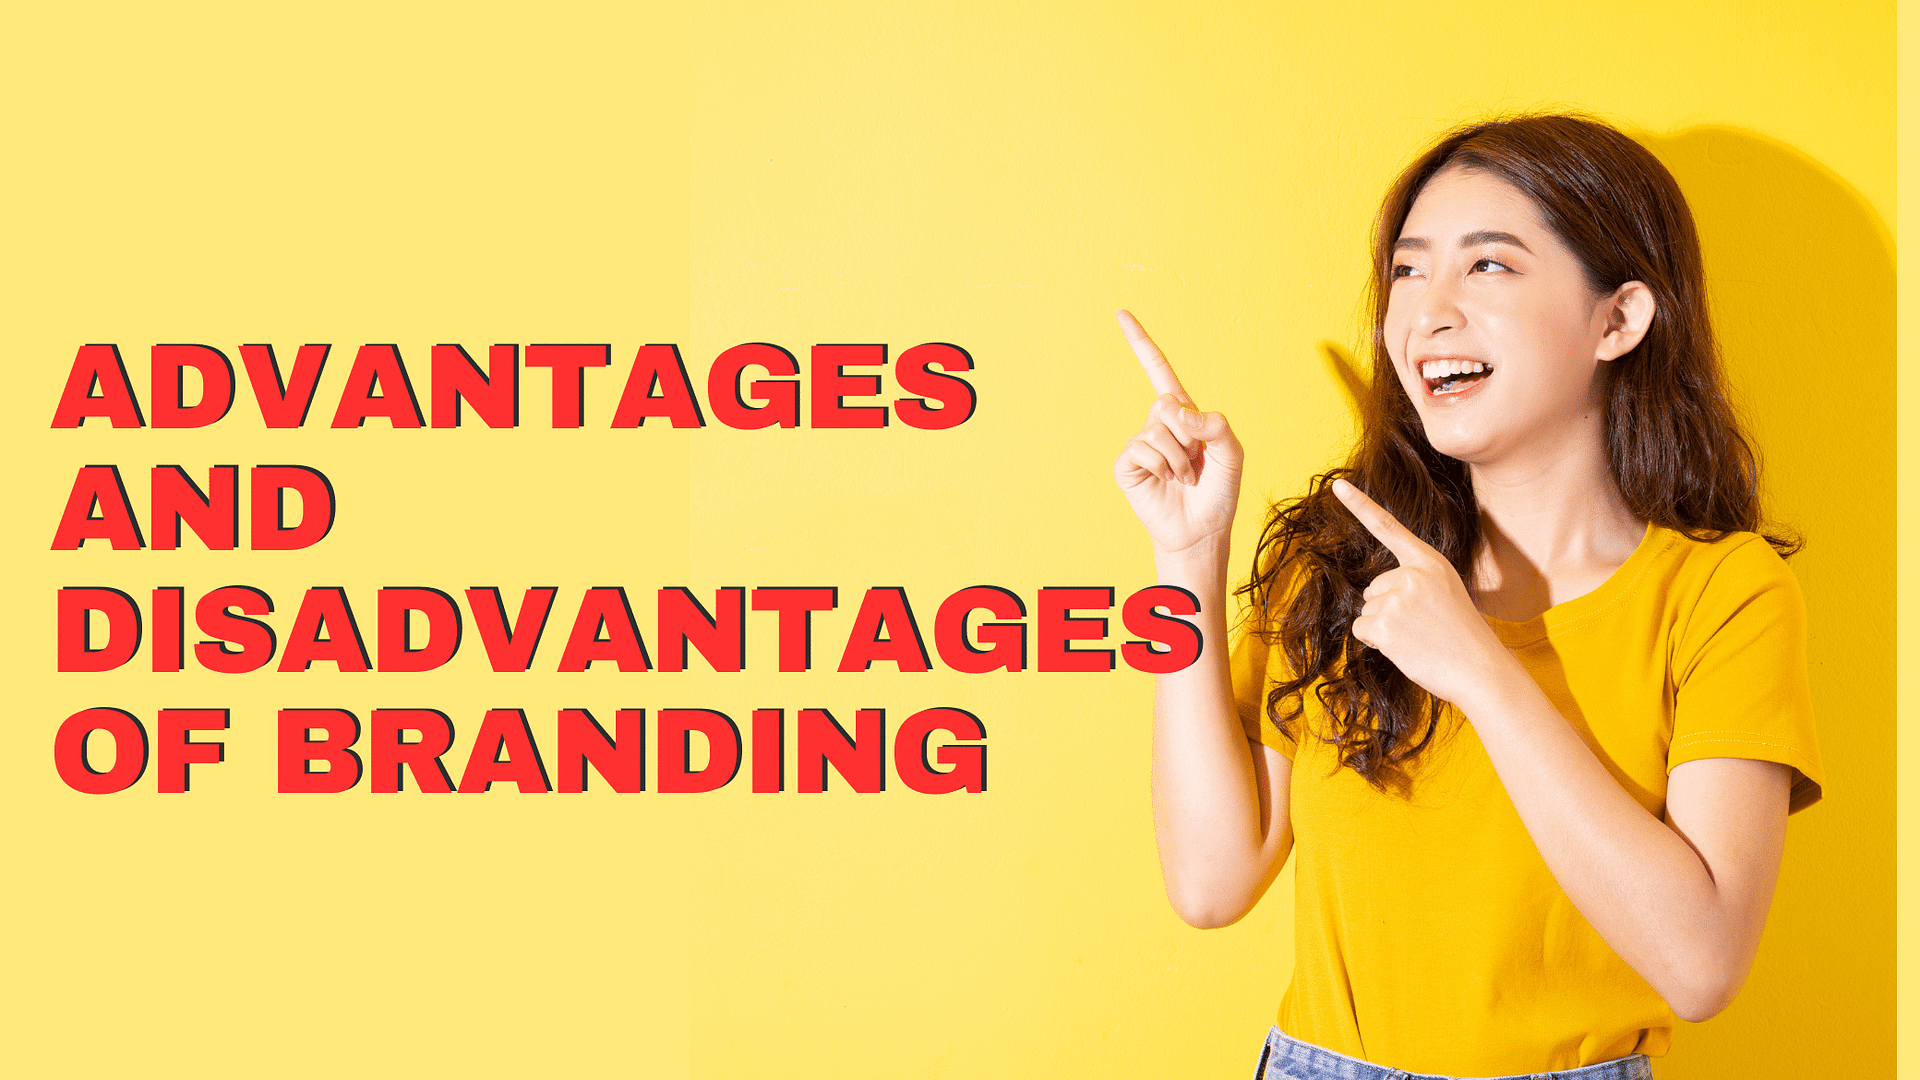 Advantages and Disadvantages of Branding